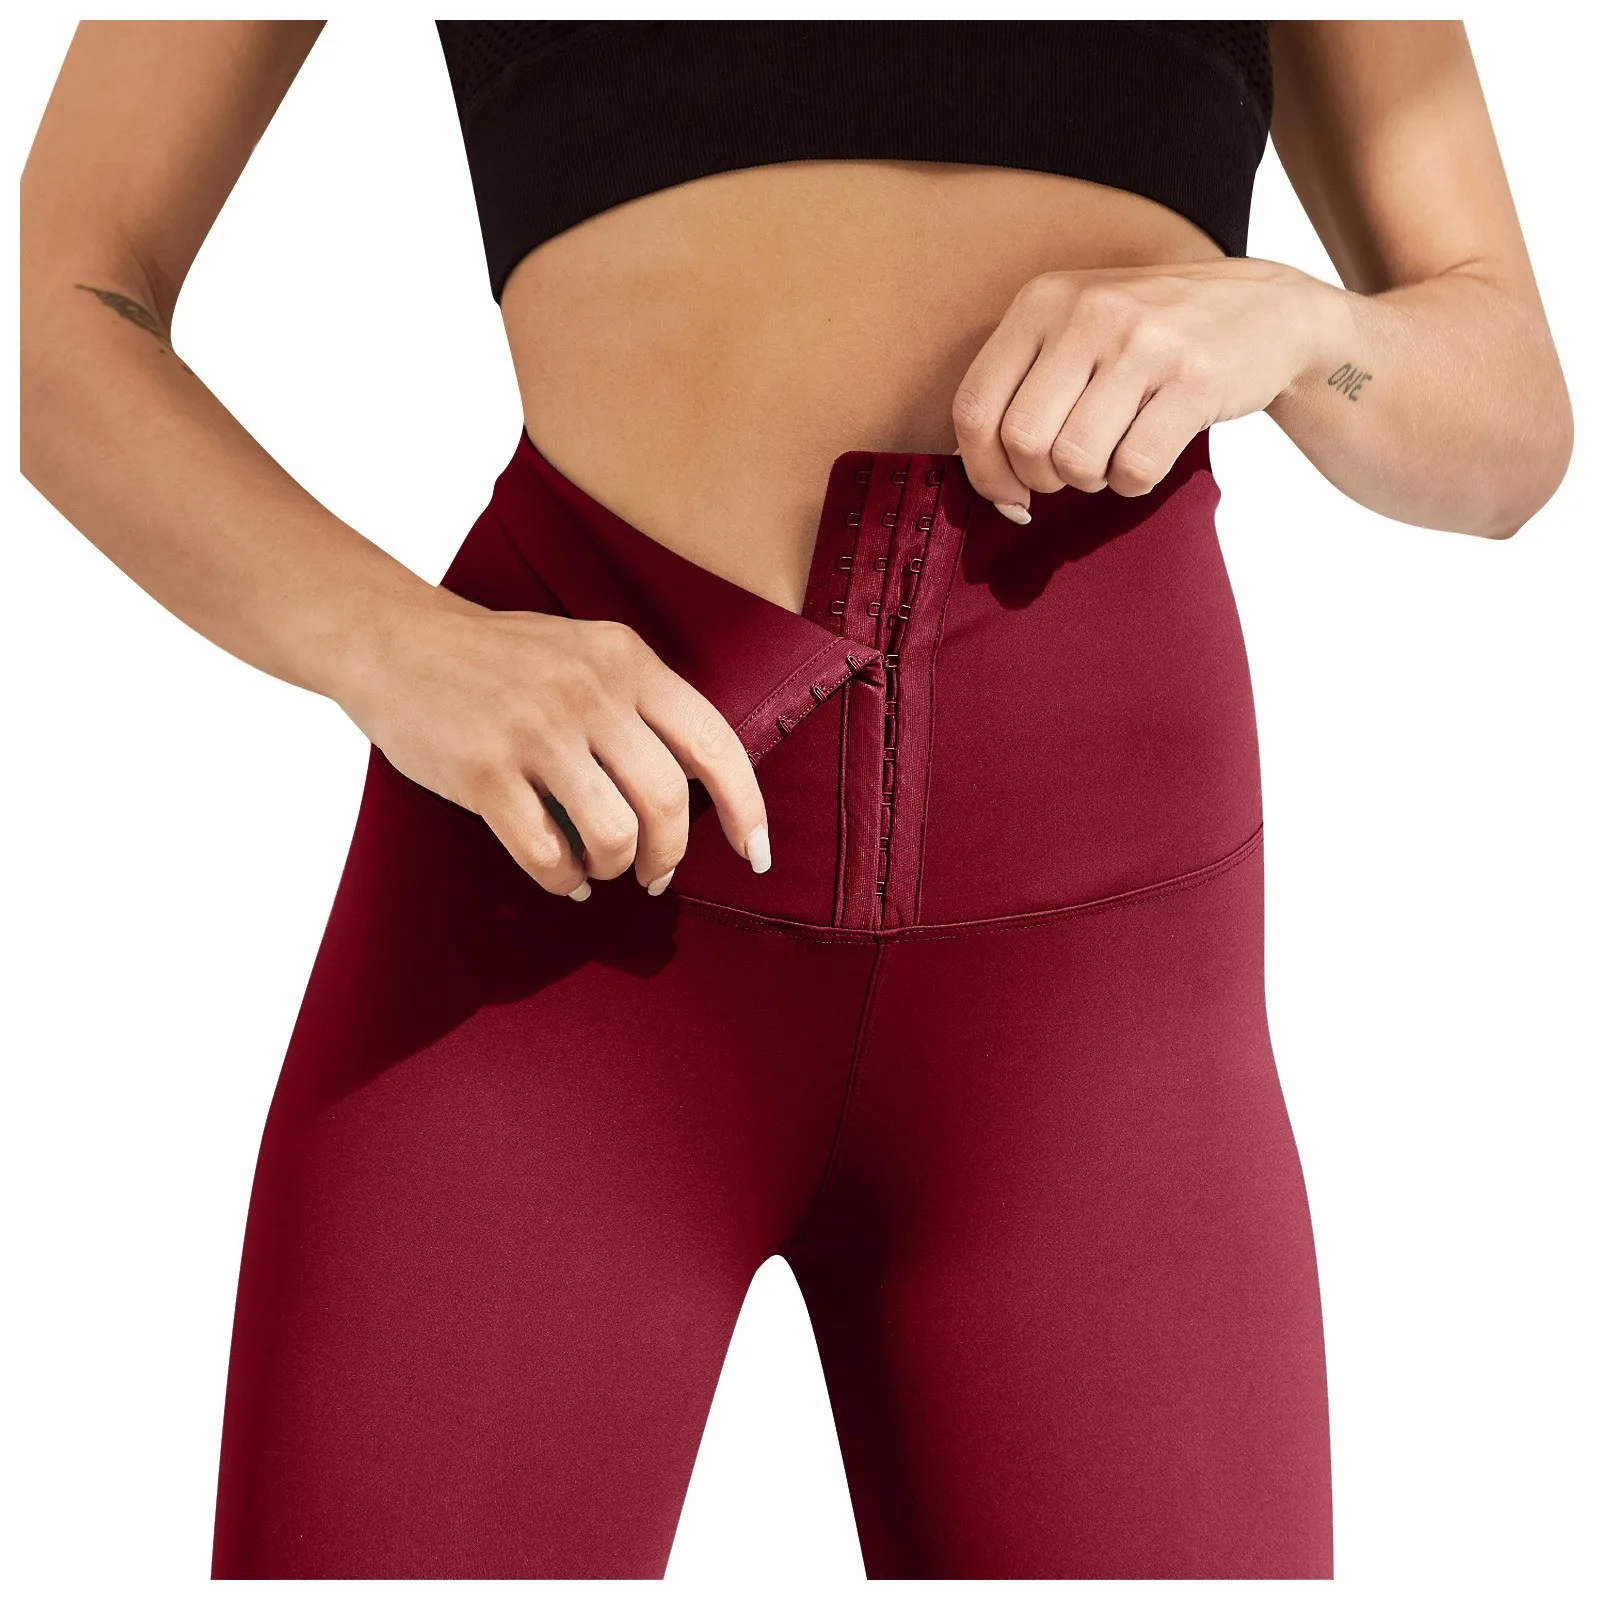 spanx leggings Push Up Seamless Leggings Plus Size Tights For Women Casual Solid Pants Women Sports Trousers Fitness Woman Legging Pant Sexi brown leggings